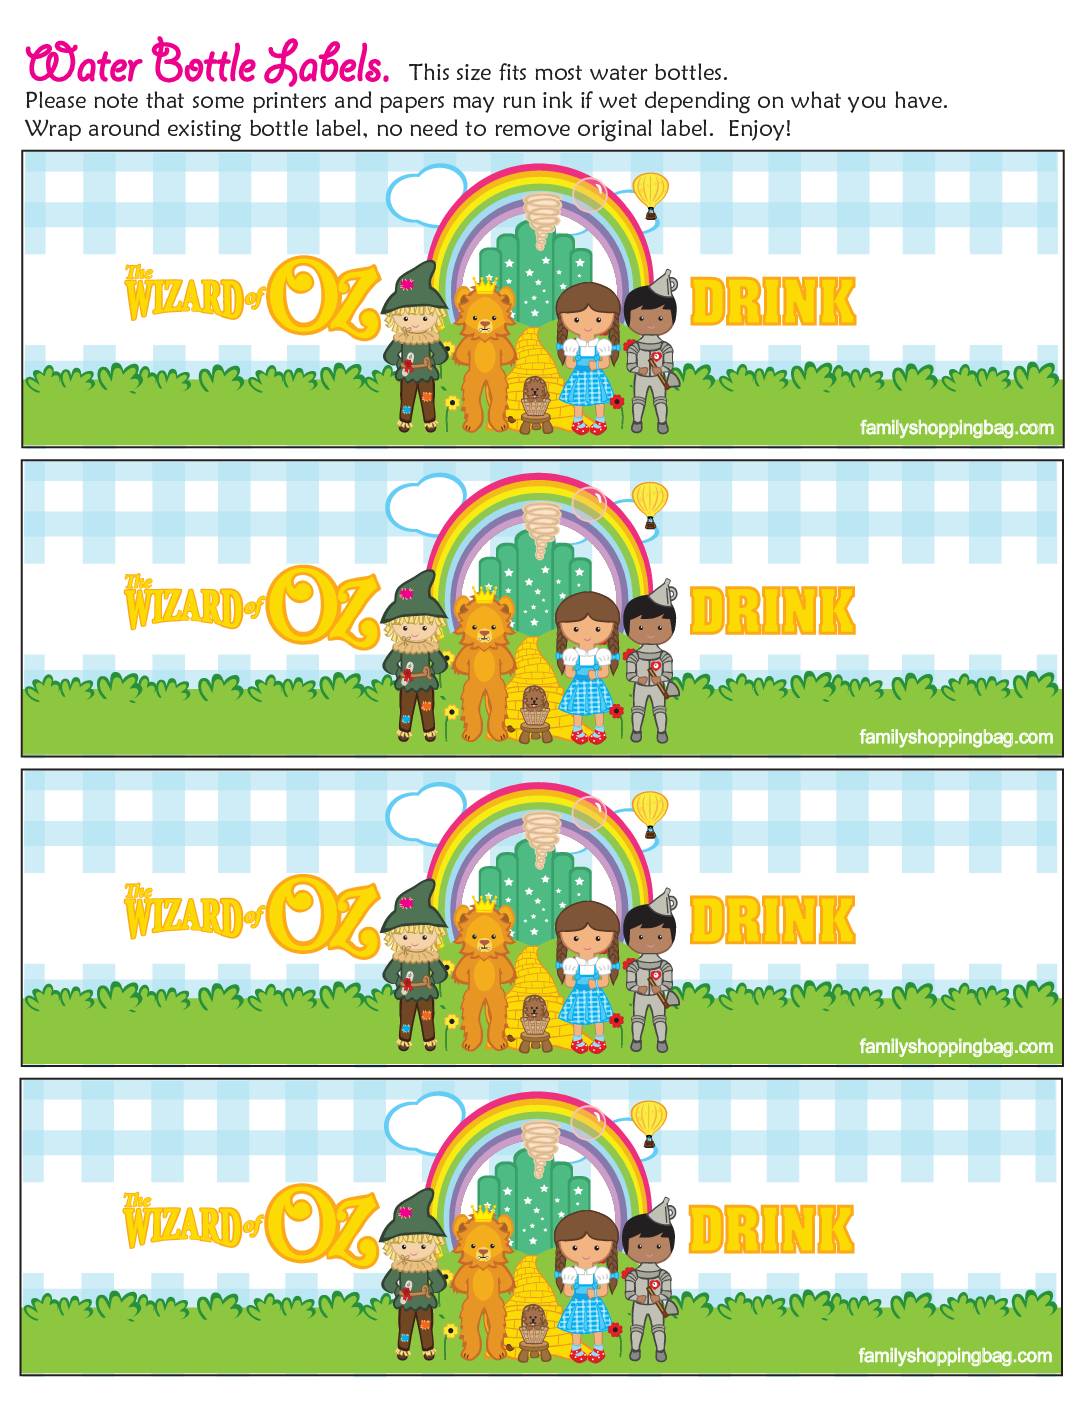 Water Label Wizard of Oz Labels